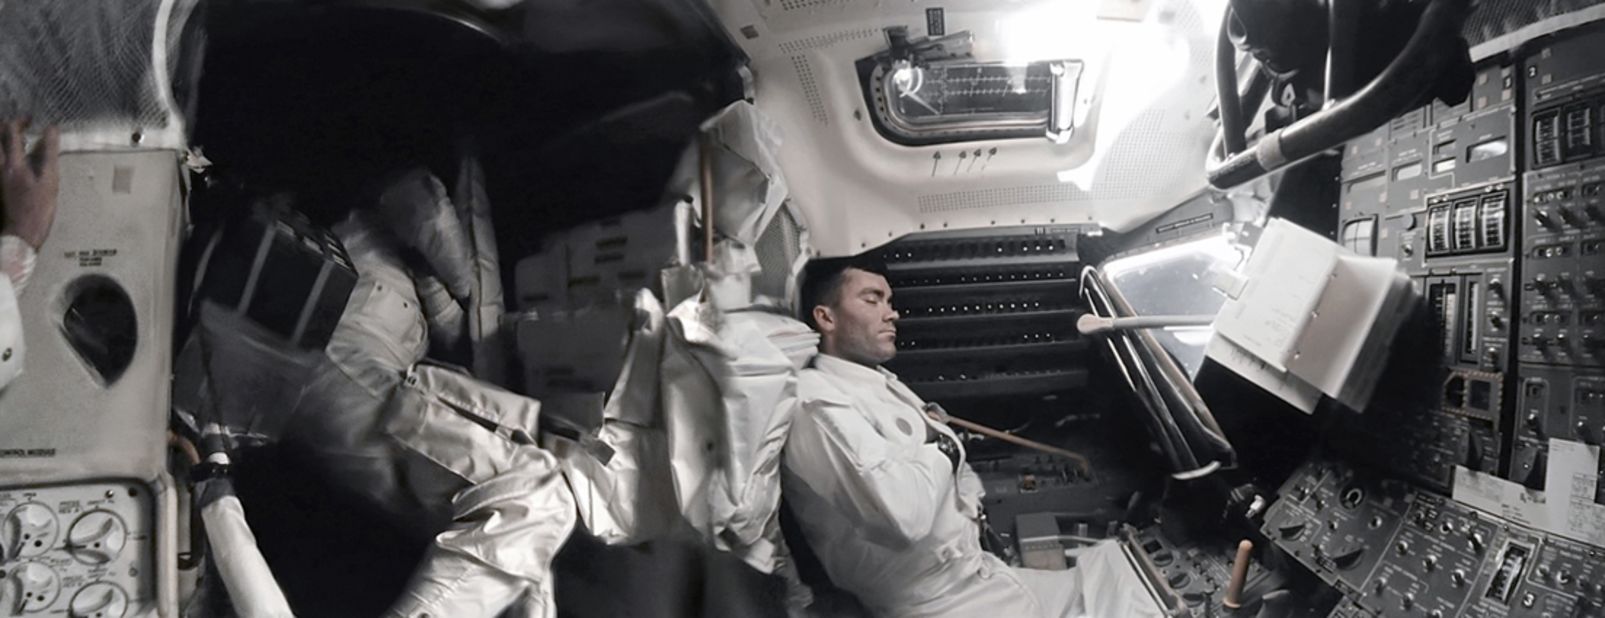 Astronaut Fred Hause (right) takes a nap inside the Apollo 13 Lunar Module, nicknamed "lifeboat" after the crew was forced to shelter in it, following the failure of an oxygen tank in the service module.